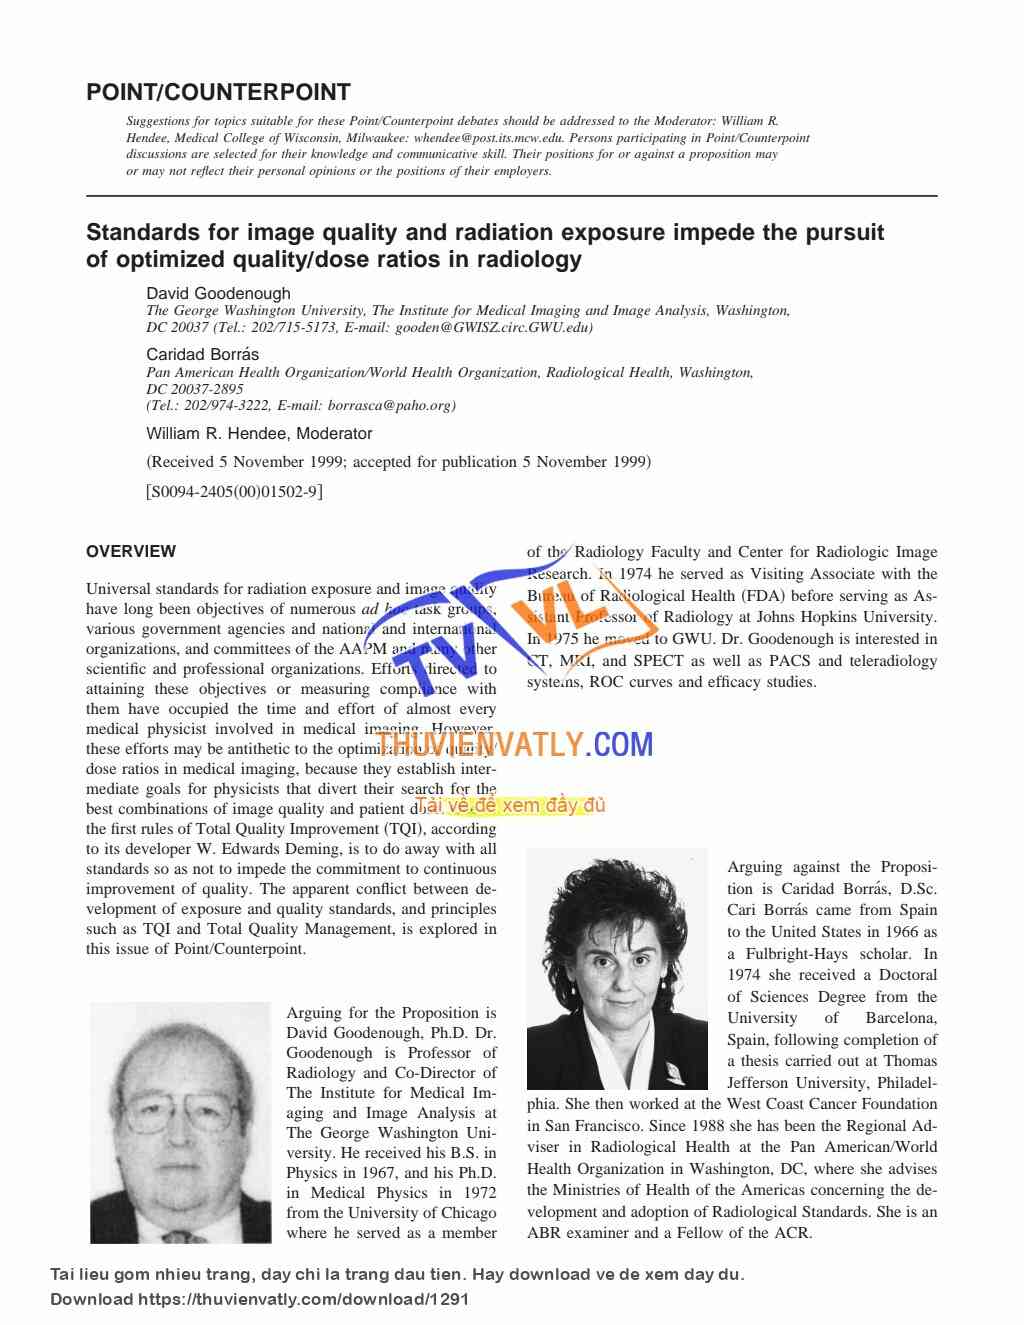 Standards for image quality and radiation exposure impede the pursuit